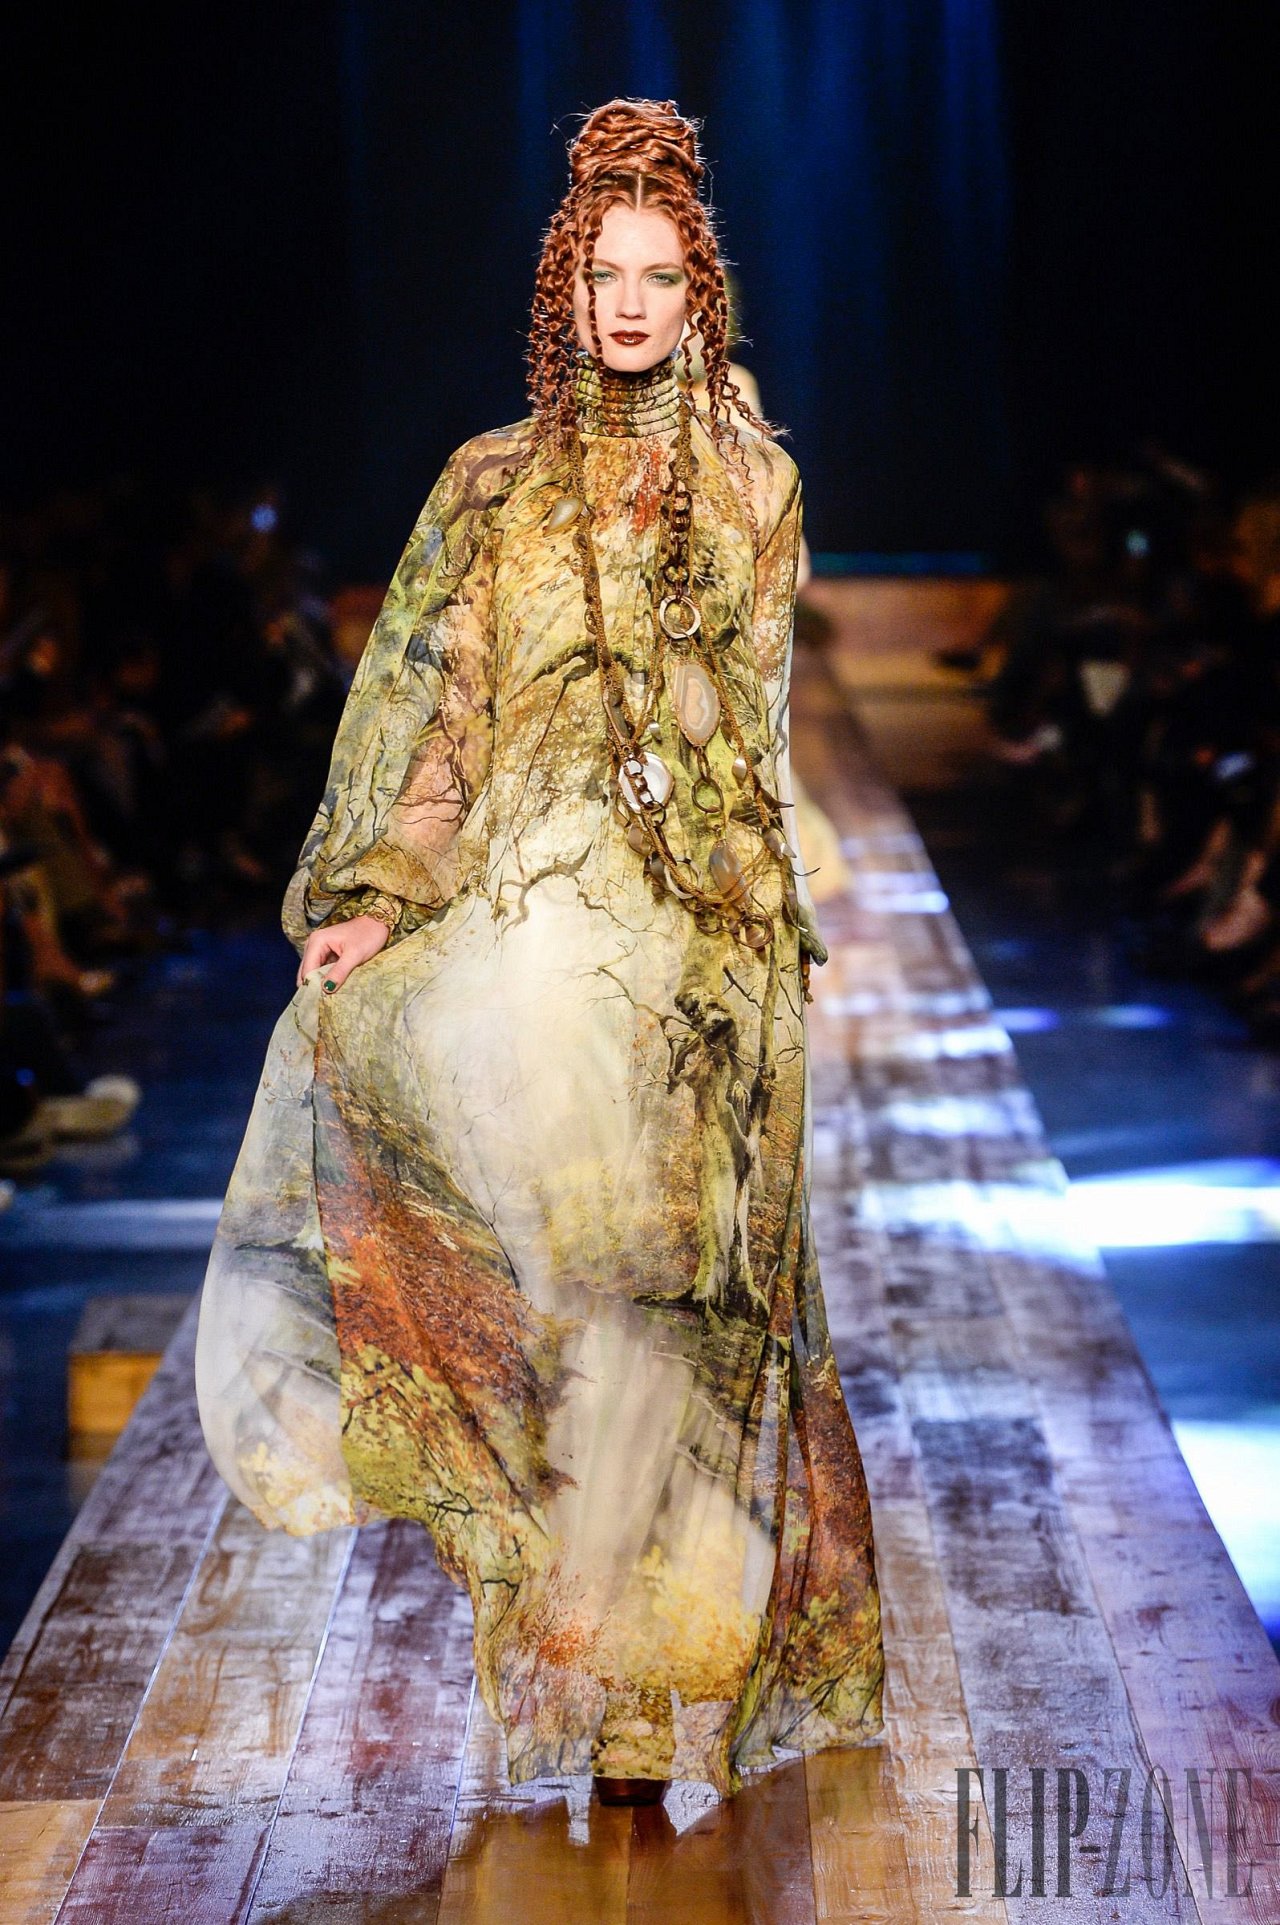 Into the Woods - Jean Paul Gaultier forest fantasia